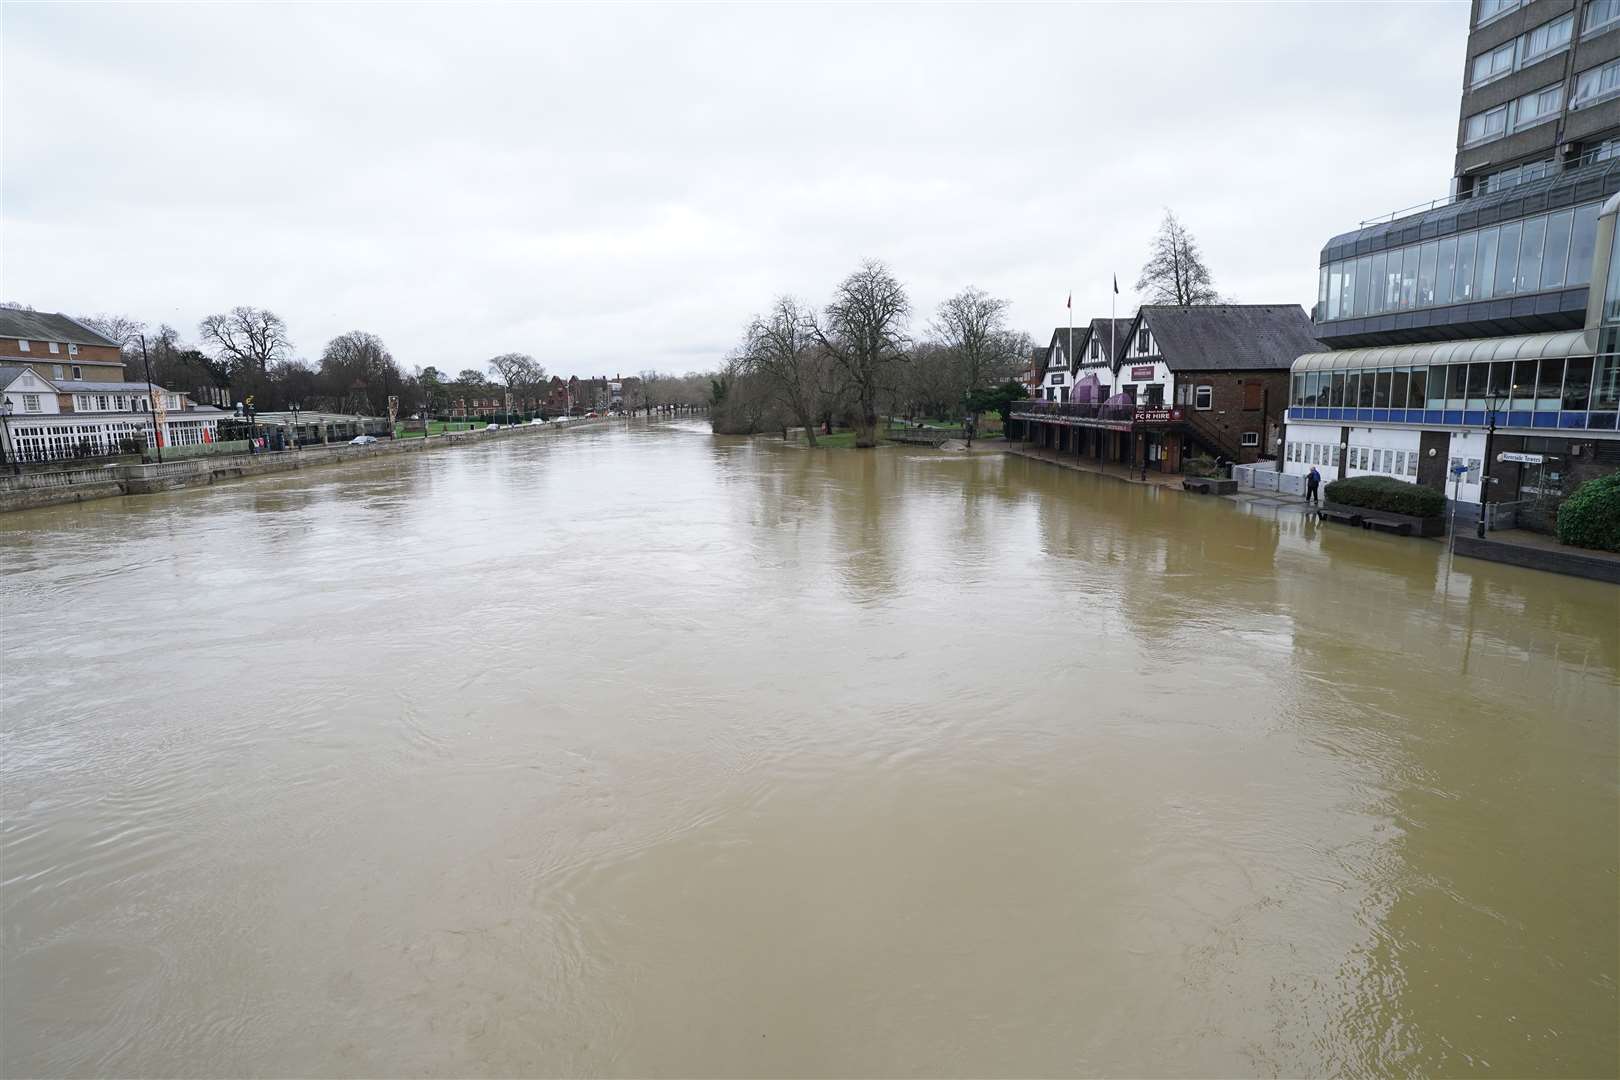 The River Great Ouse in Bedford, which has burst its banks following heavy rainfall (Stefan Rousseau/PA)